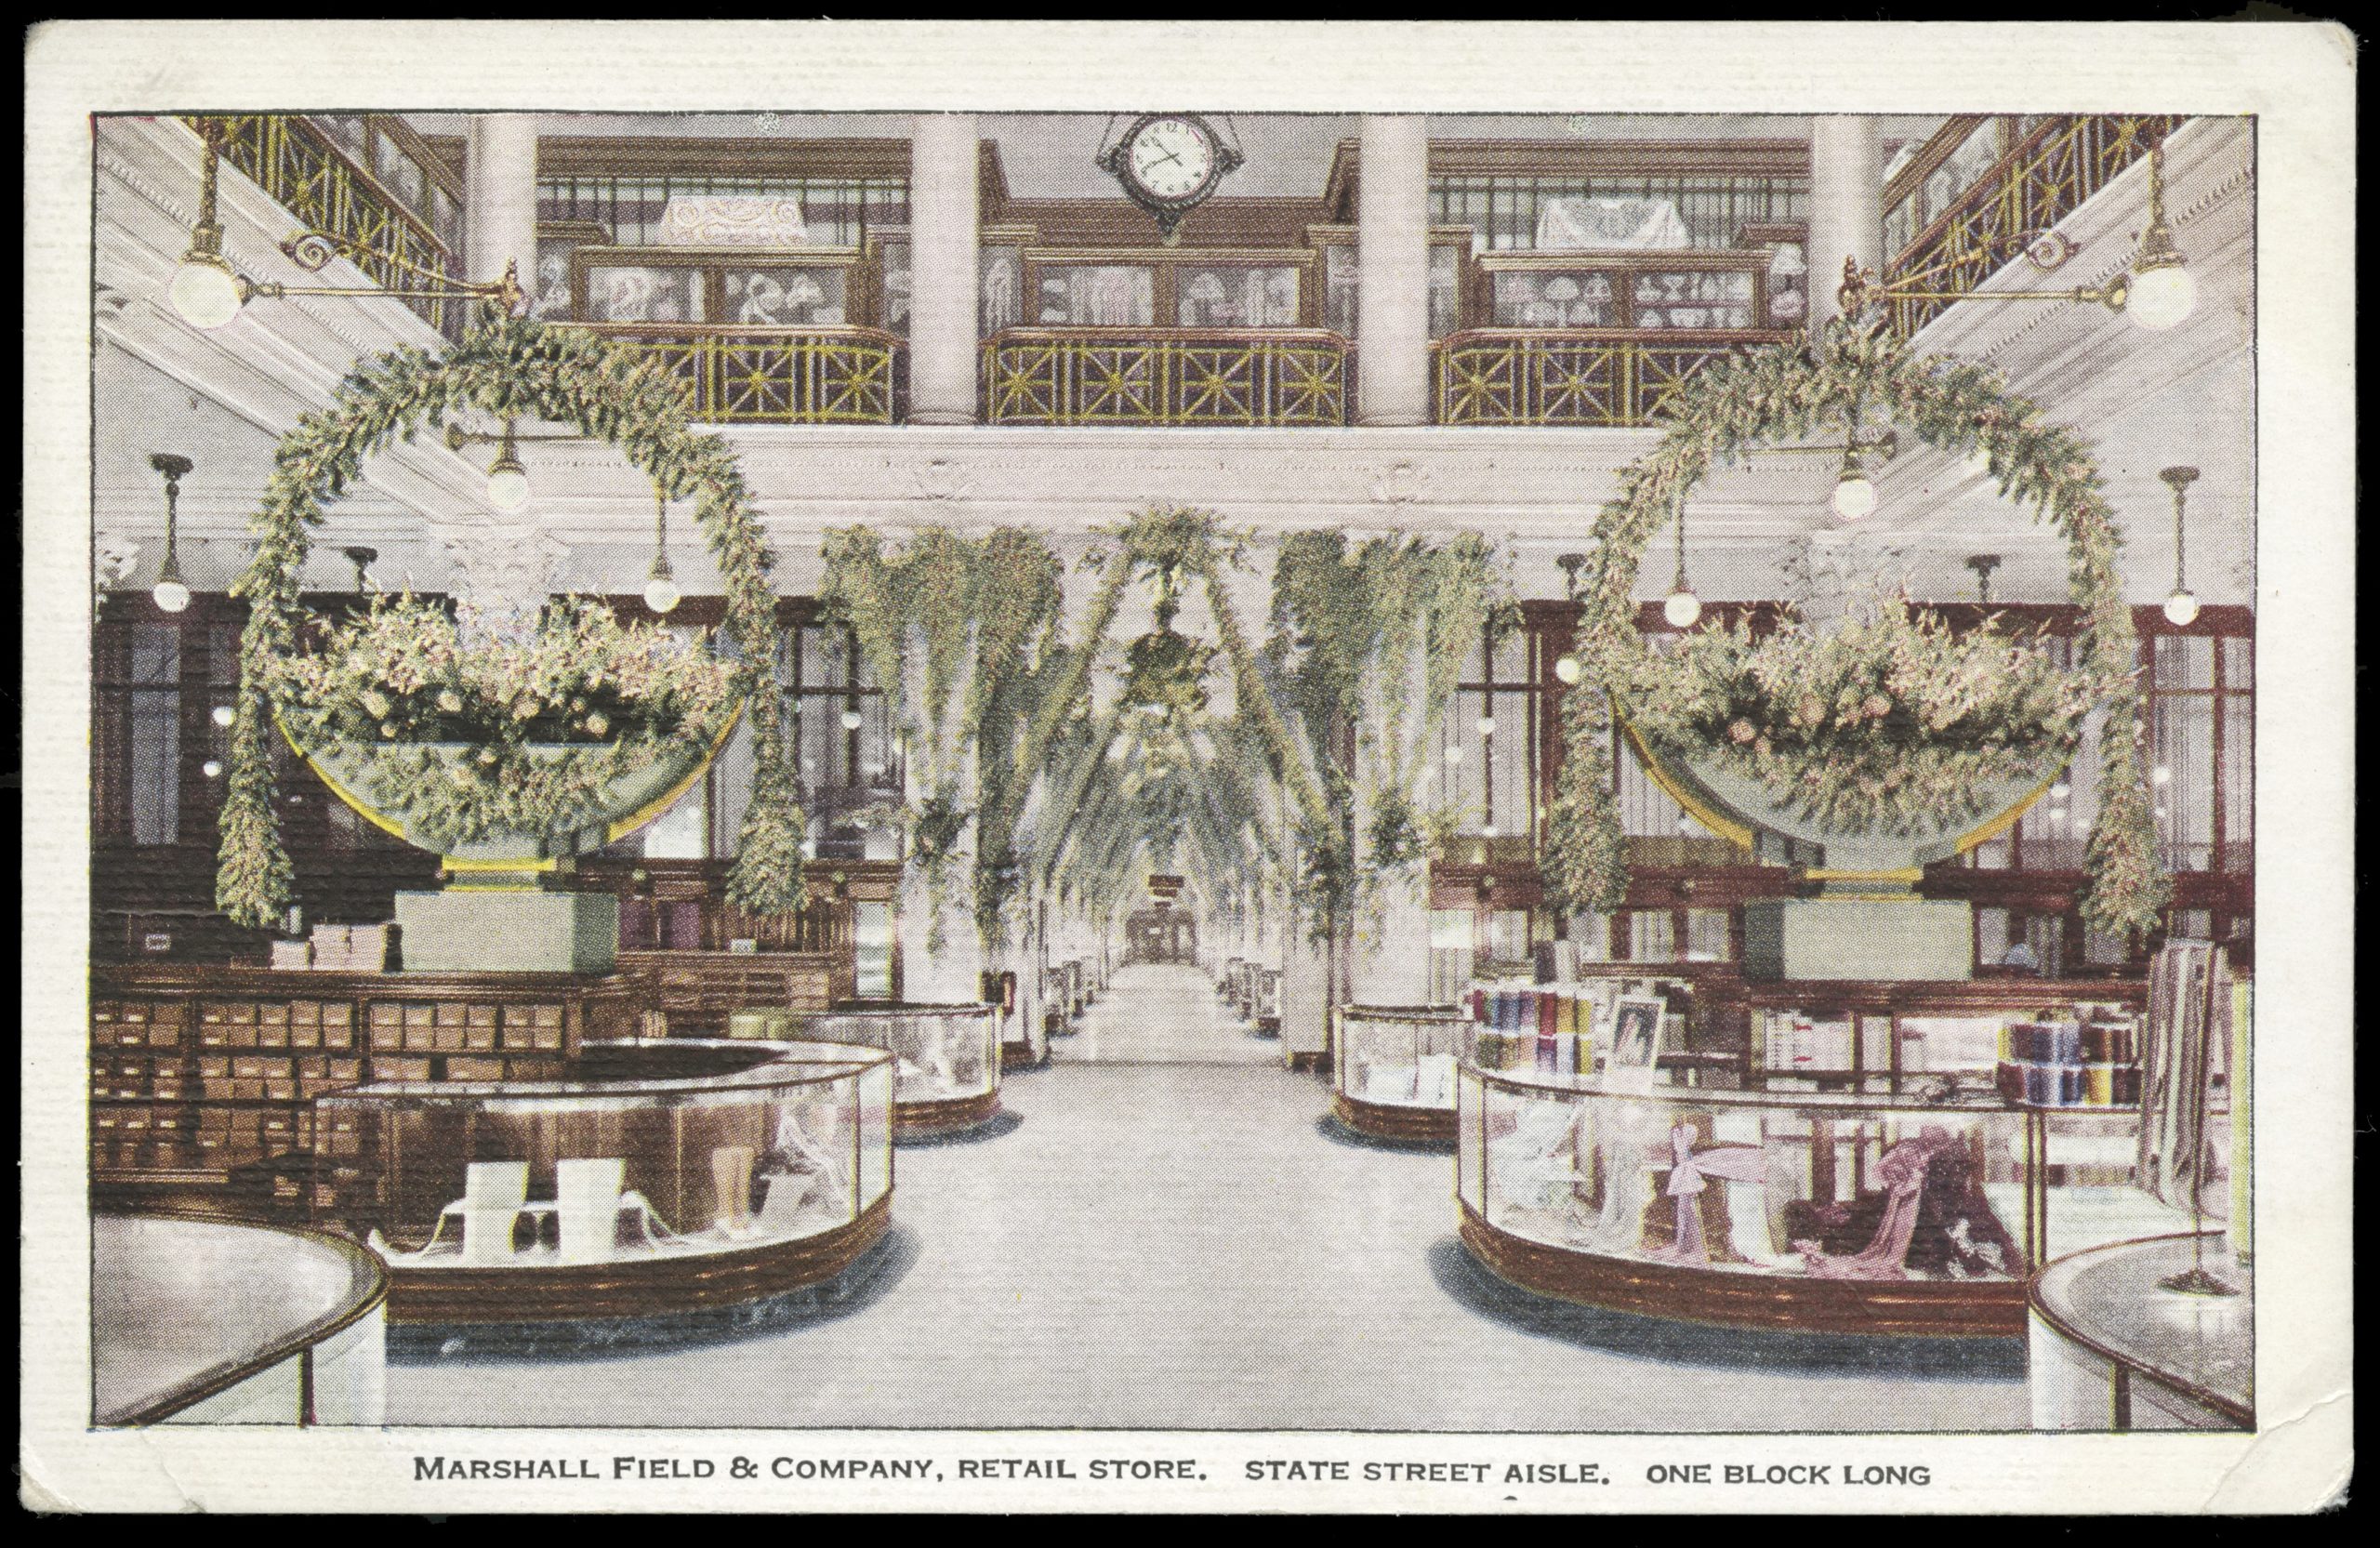 An illustration of the interior of a retail store